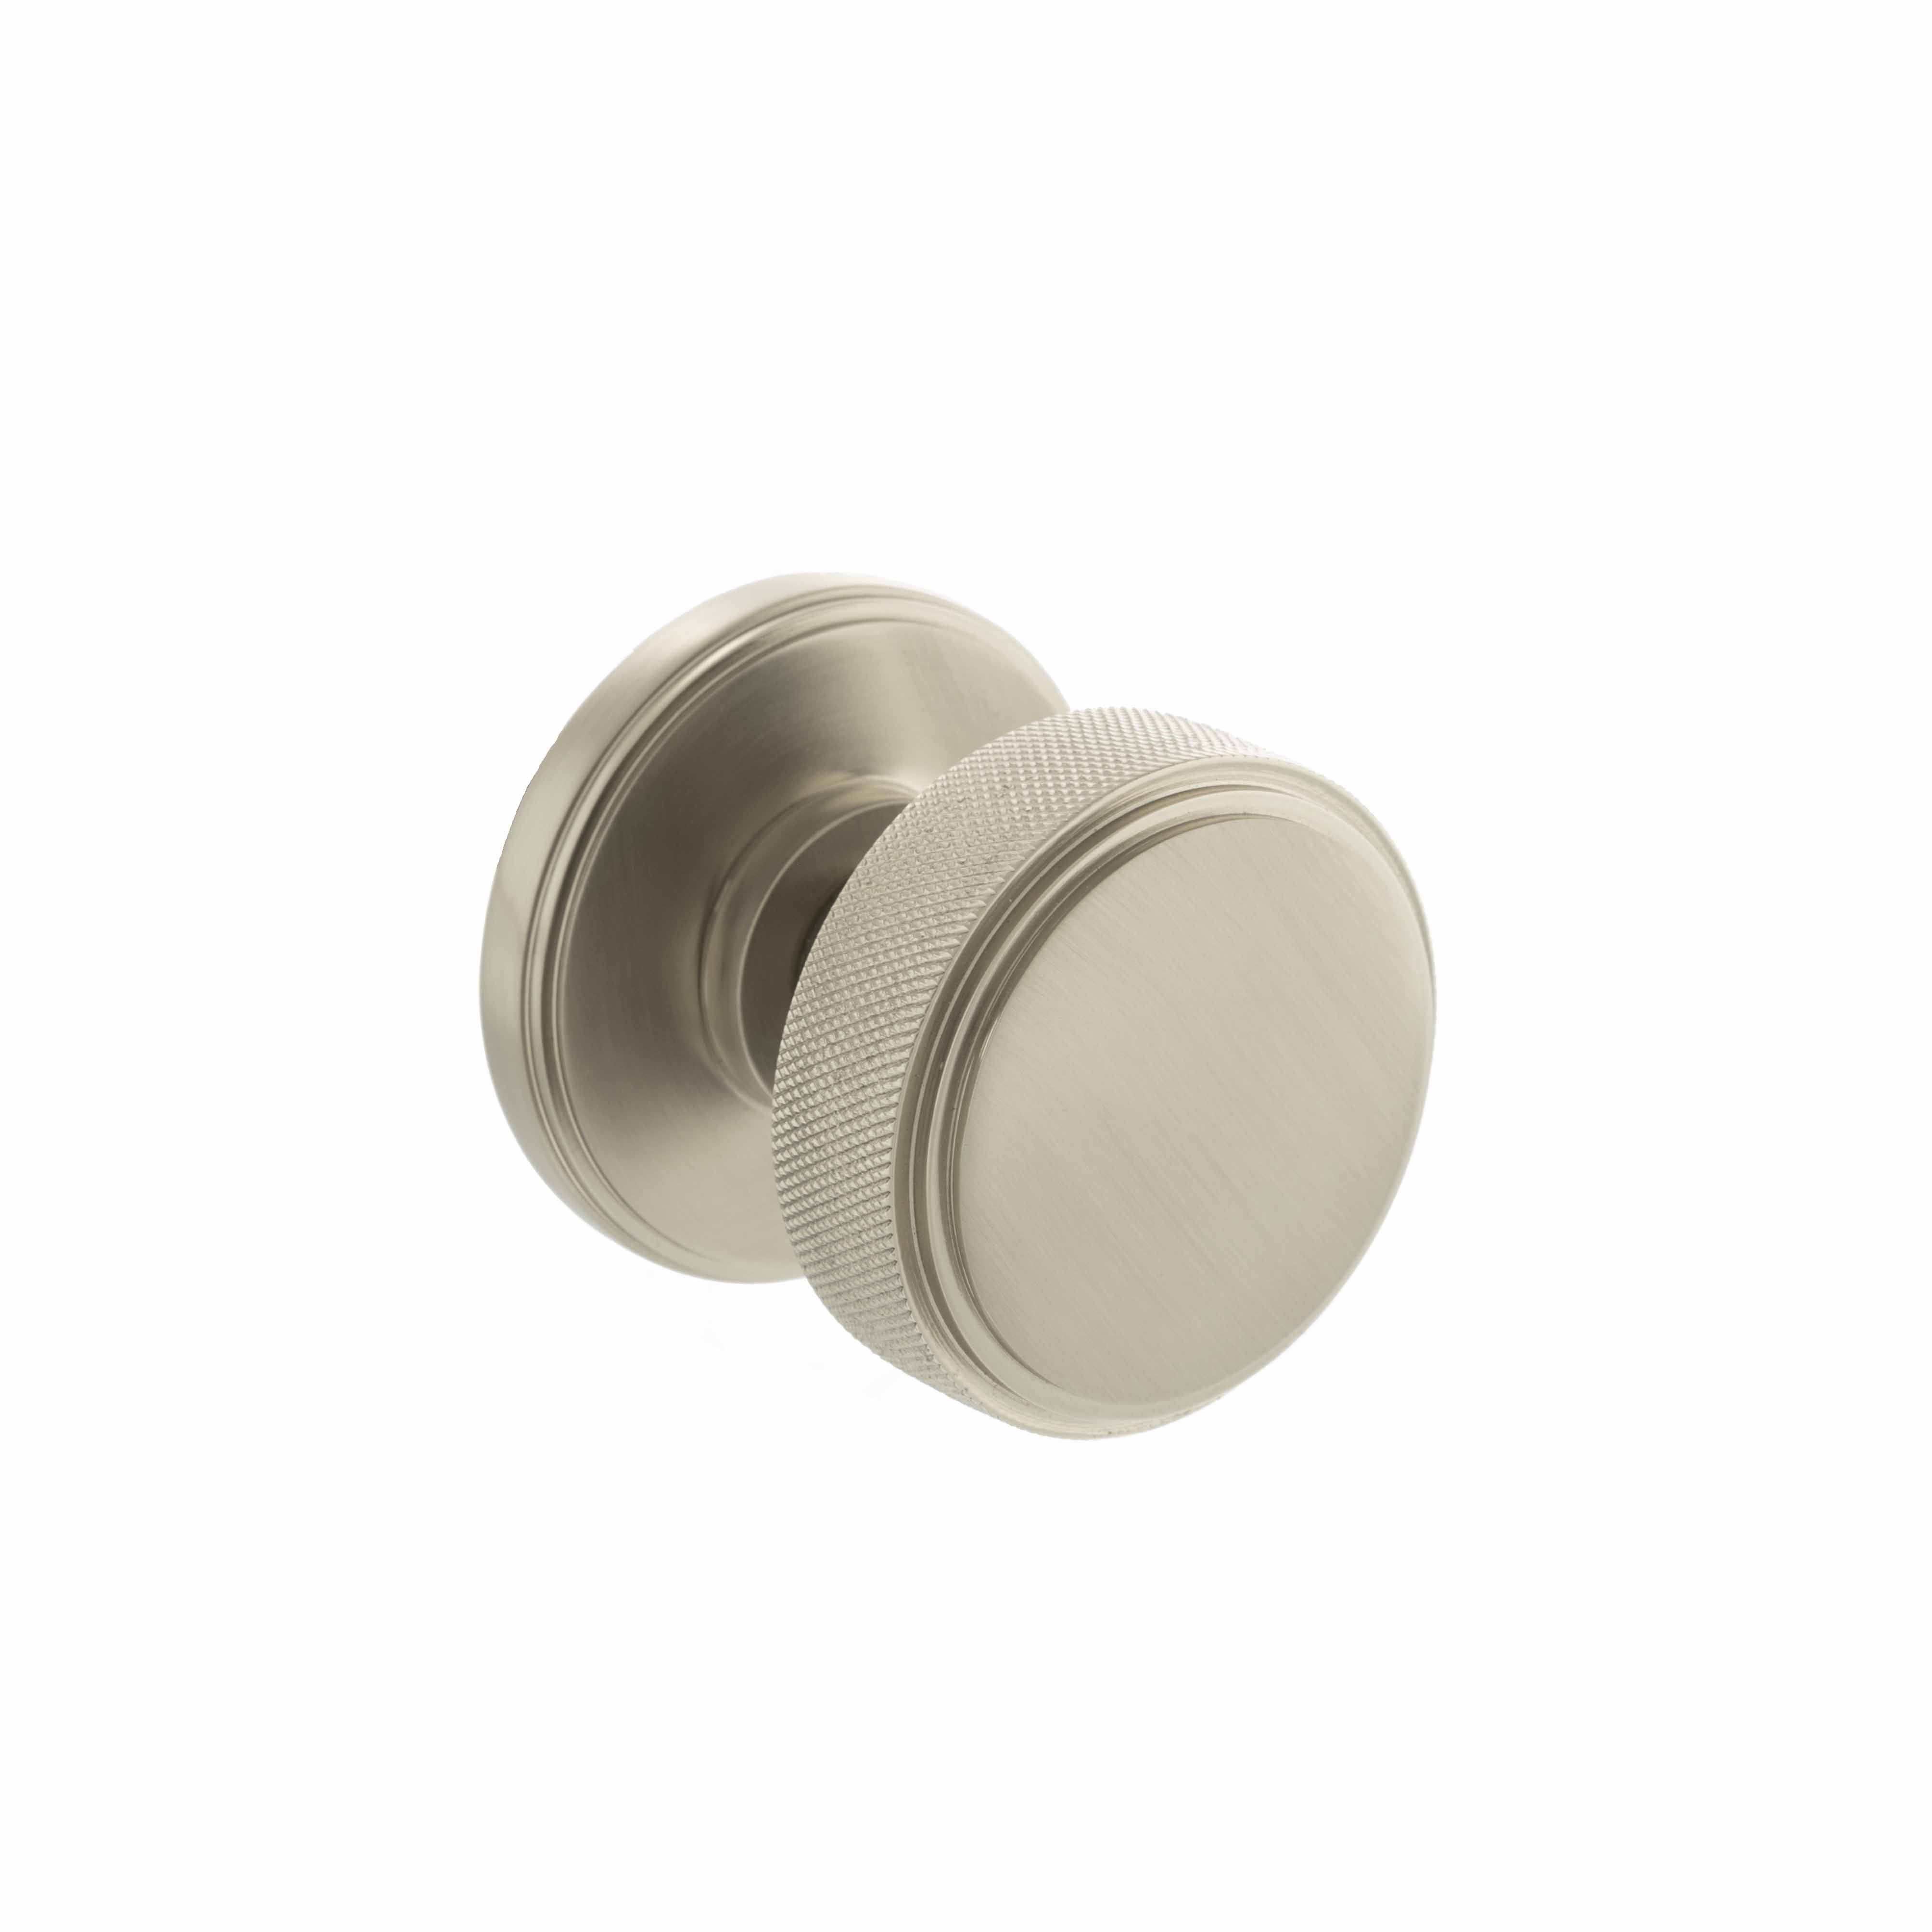 Millhouse Brass Harrison Solid Brass Knurled Mortice Knob on Concealed Fix Rose - Satin Nickel